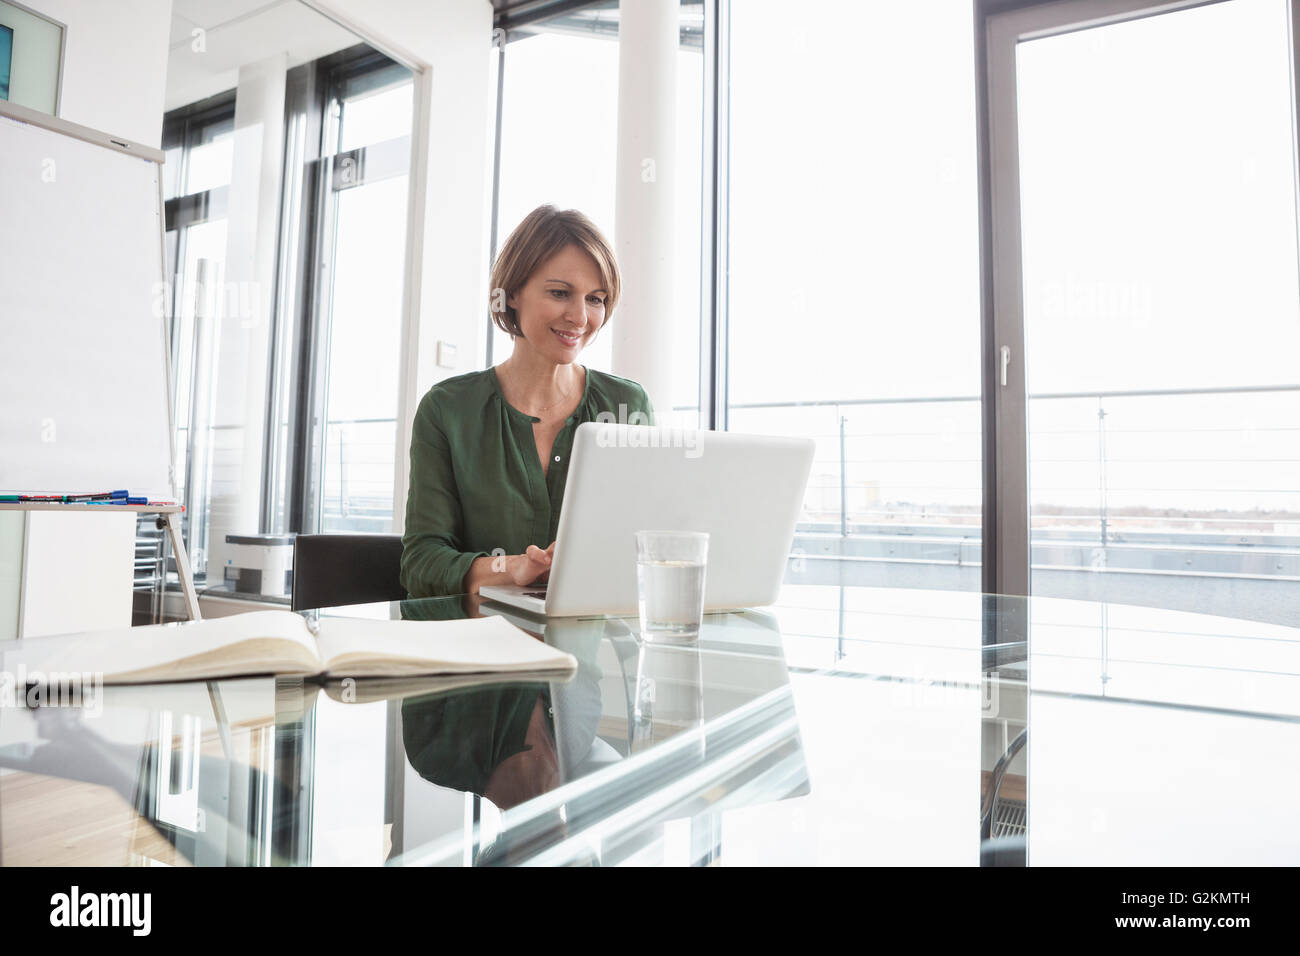 Smiling businesswoman working on laptop at office desk Stock Photo